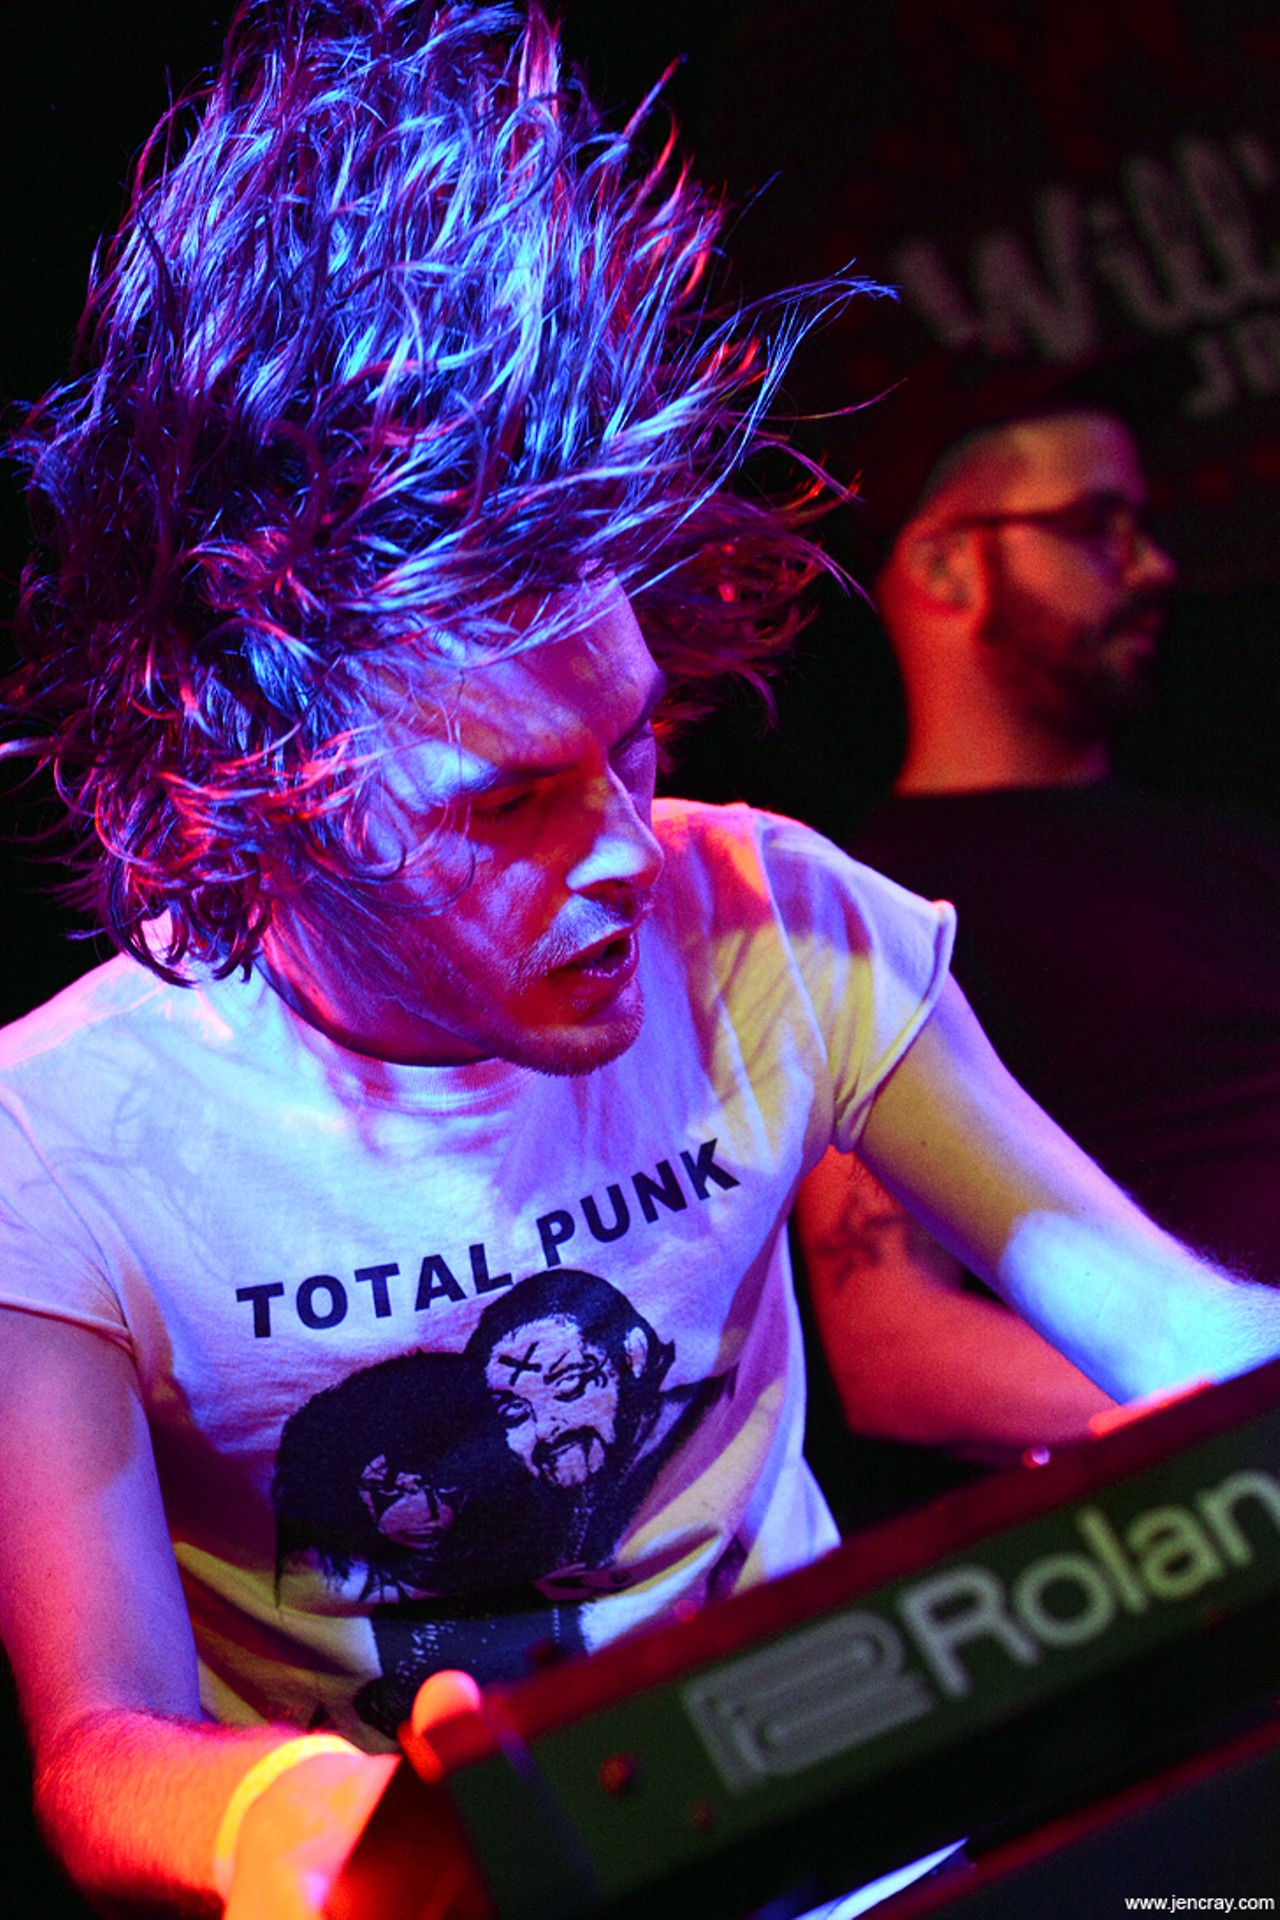 Photos from Jacuzzi Boys, Octo Gato, The Sh-Booms and Autarx at Will's Pub